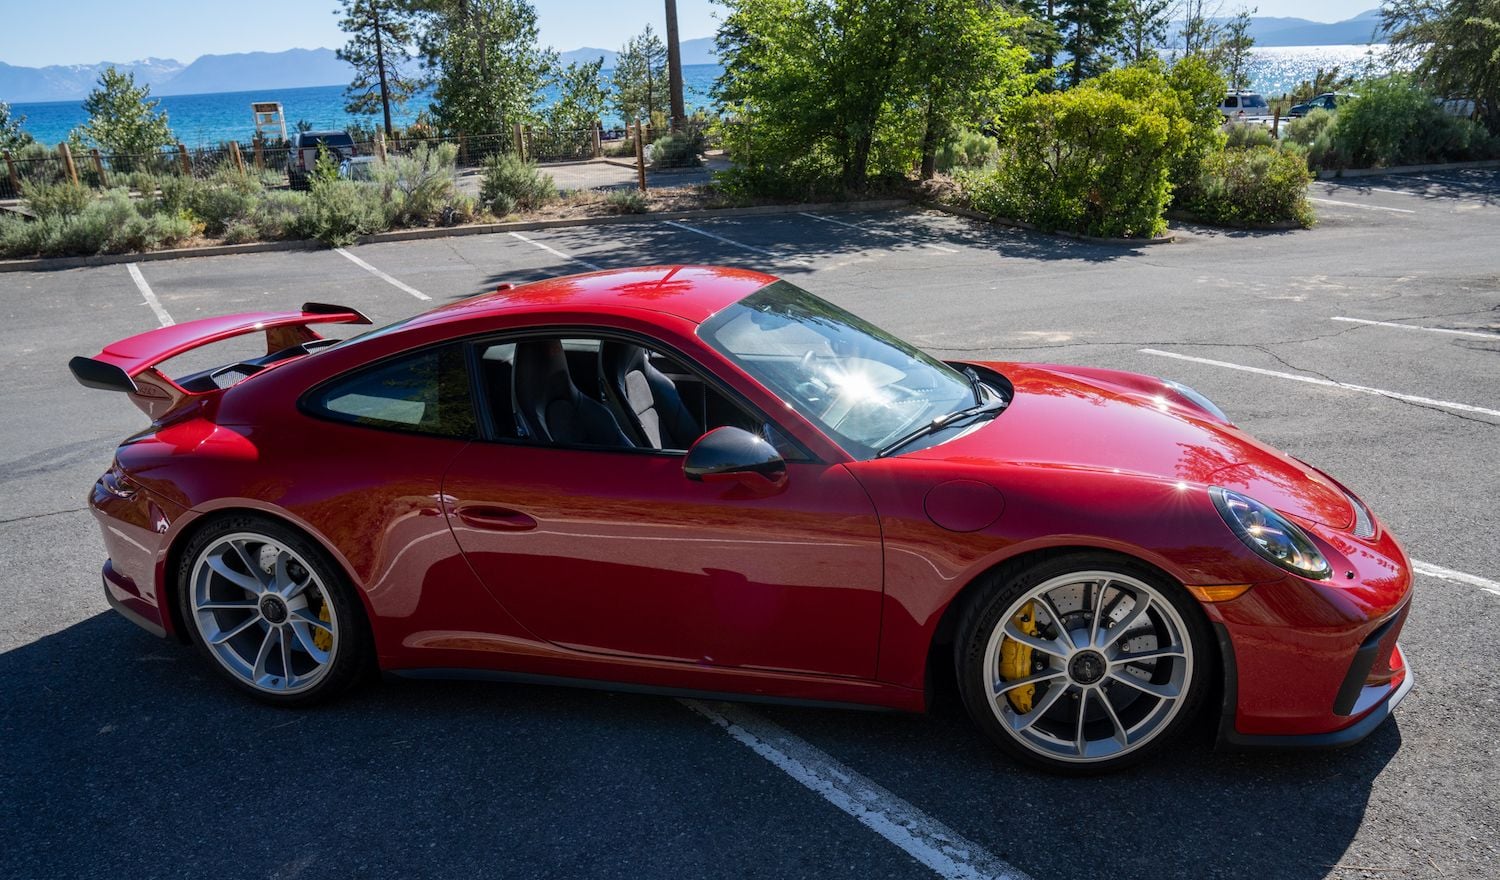 2018 Porsche GT3 - 911 GT3 991.2 Carmine Red , Leather , PCCB ,Lift ,7500 Mi  18 Way , LED ,ETC + - Used - VIN WP0AC2A93JS174218 - 7,500 Miles - 6 cyl - 2WD - Automatic - Coupe - Red - Reno, NV 89511, United States